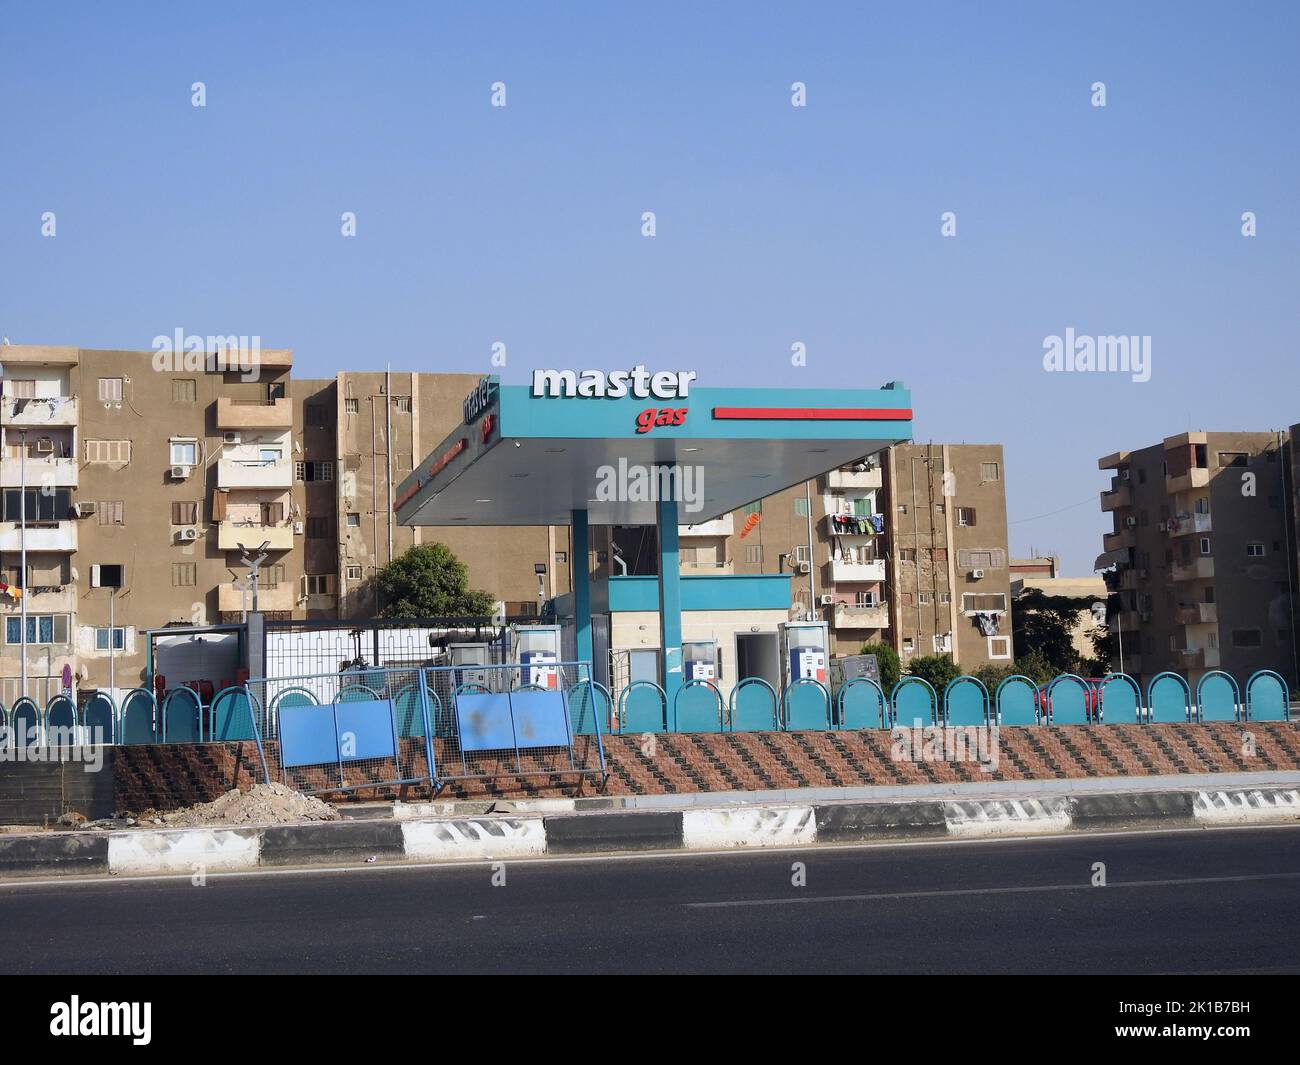 Cairo, Egypt, August 19 2022: Master gas and oil station for natural gas for vehicles and trucks using natural gas fuel in Shinzo Abe axis in Egypt Stock Photo